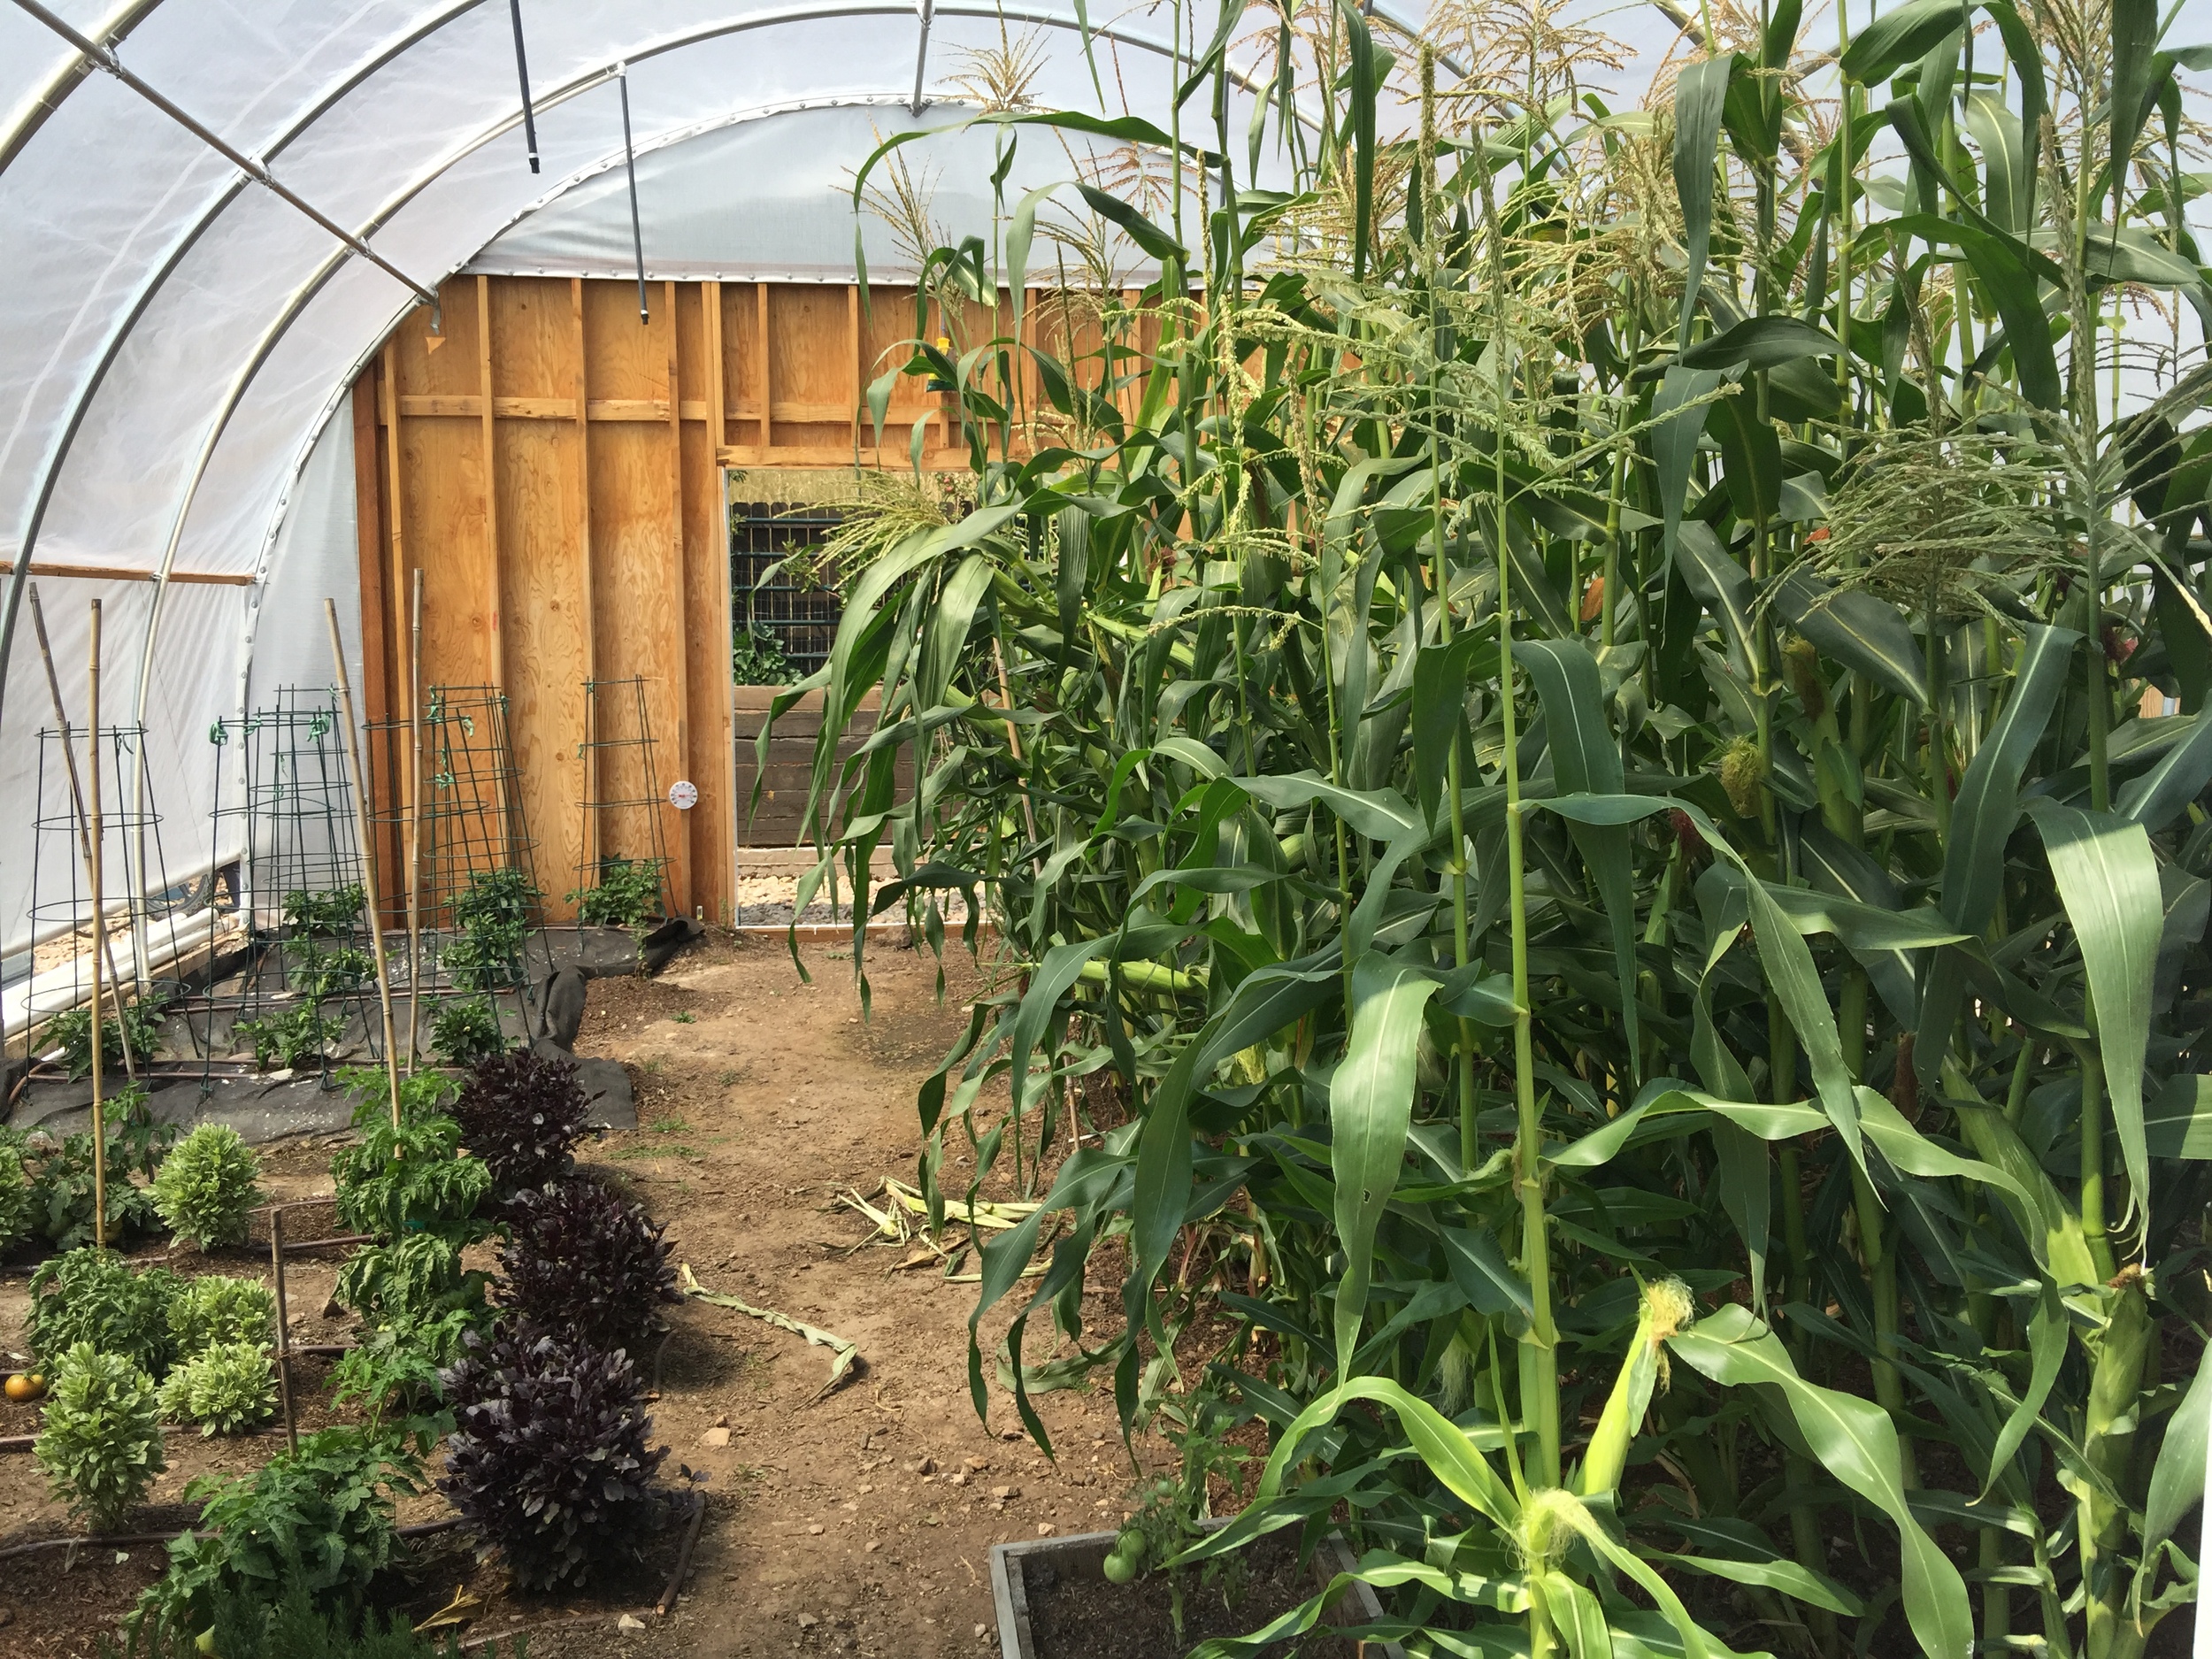 Corn and veggies growing in the greenhouse